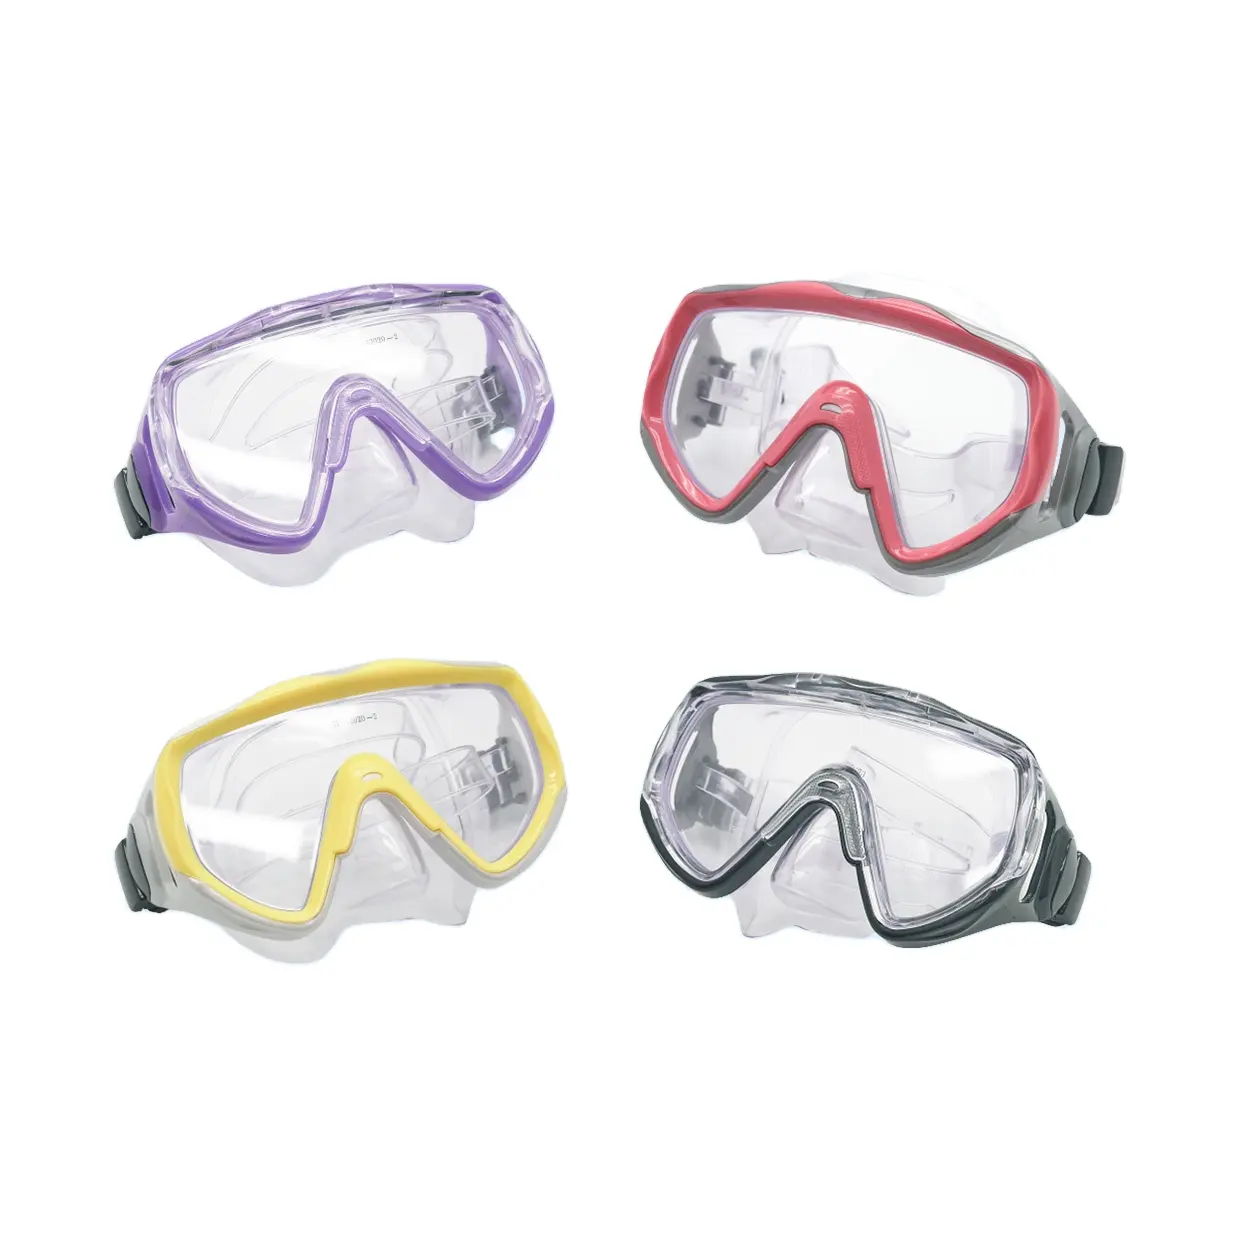 Free Diving Mask and Snorkels Anti-Fog Goggles PC Diving Swimming snorkeling Easy Breath Tube Swimming Equipment Best